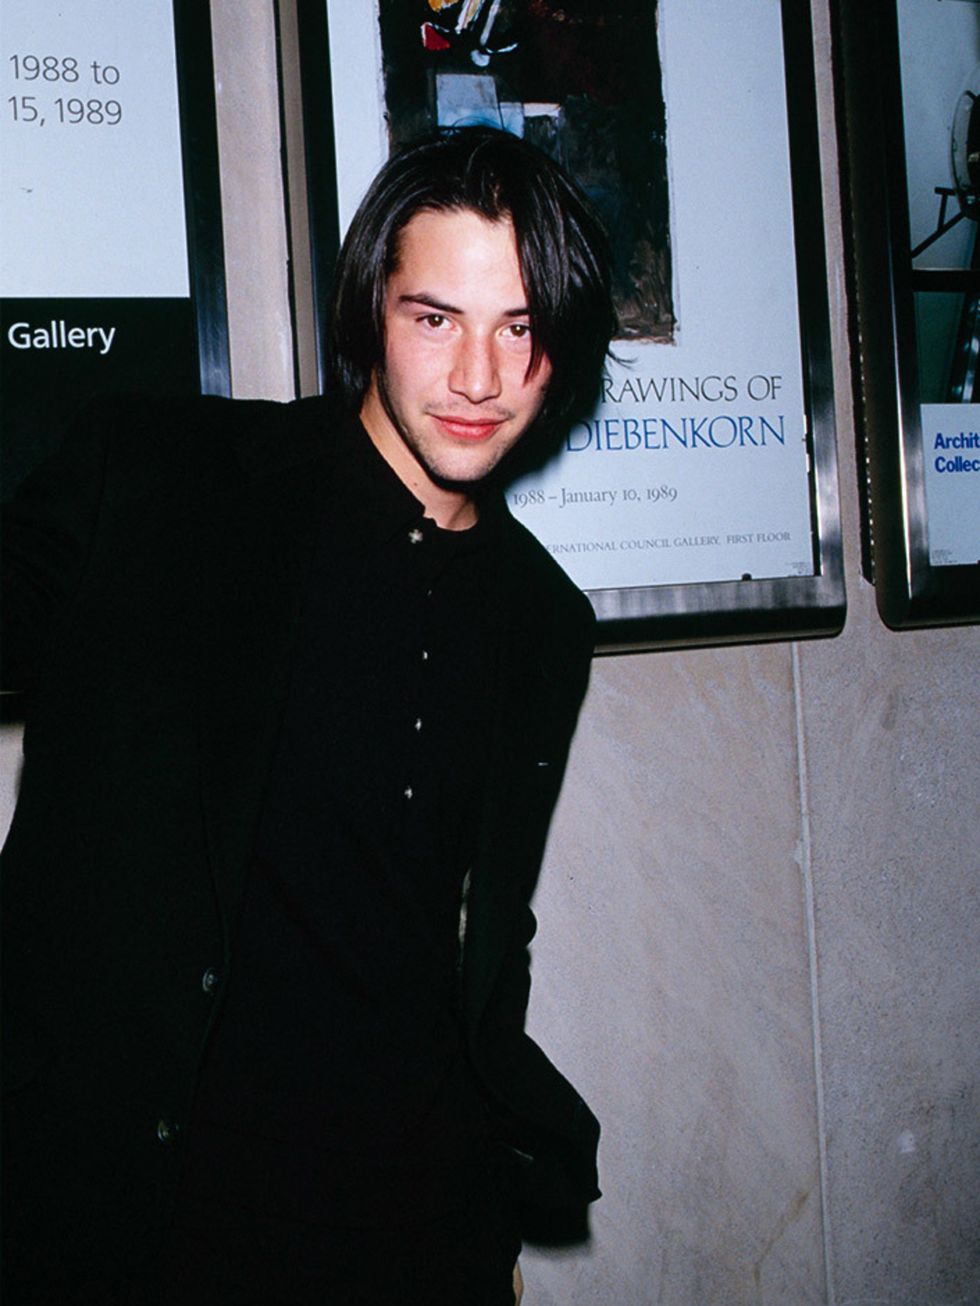 Oooh floppy haired Keanu!